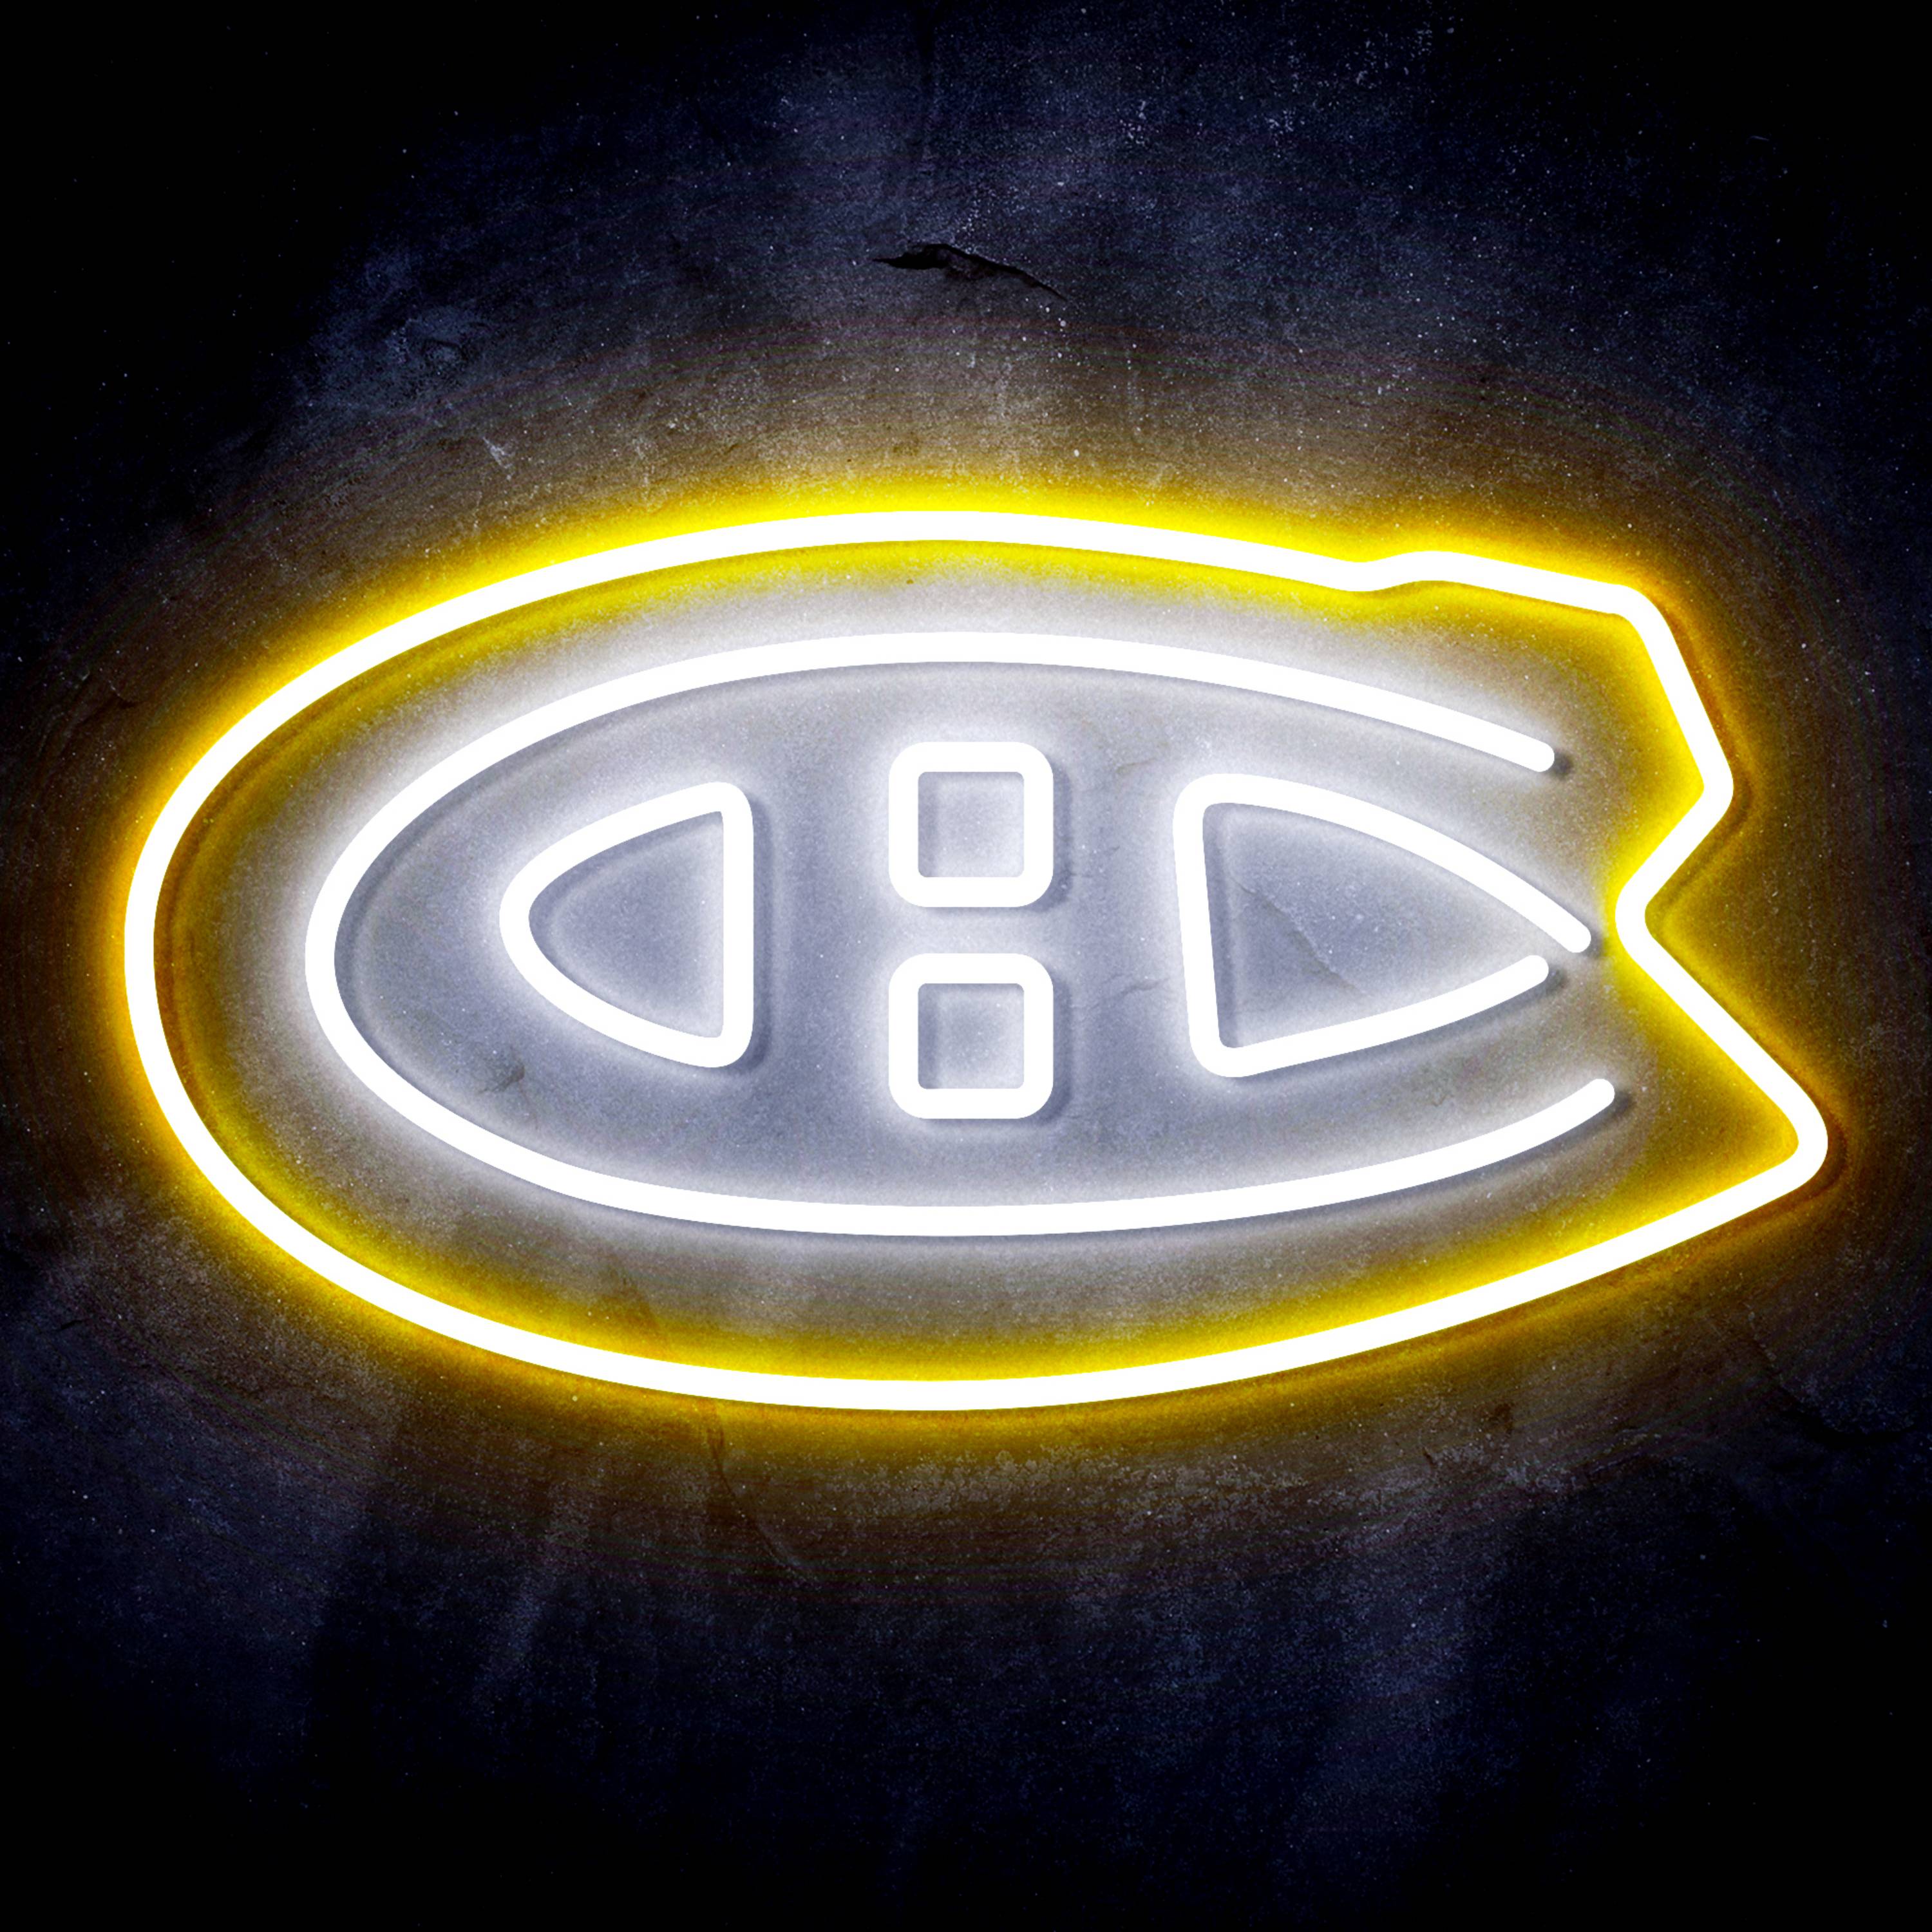 NHL Montreal Canadiens LED Neon Sign